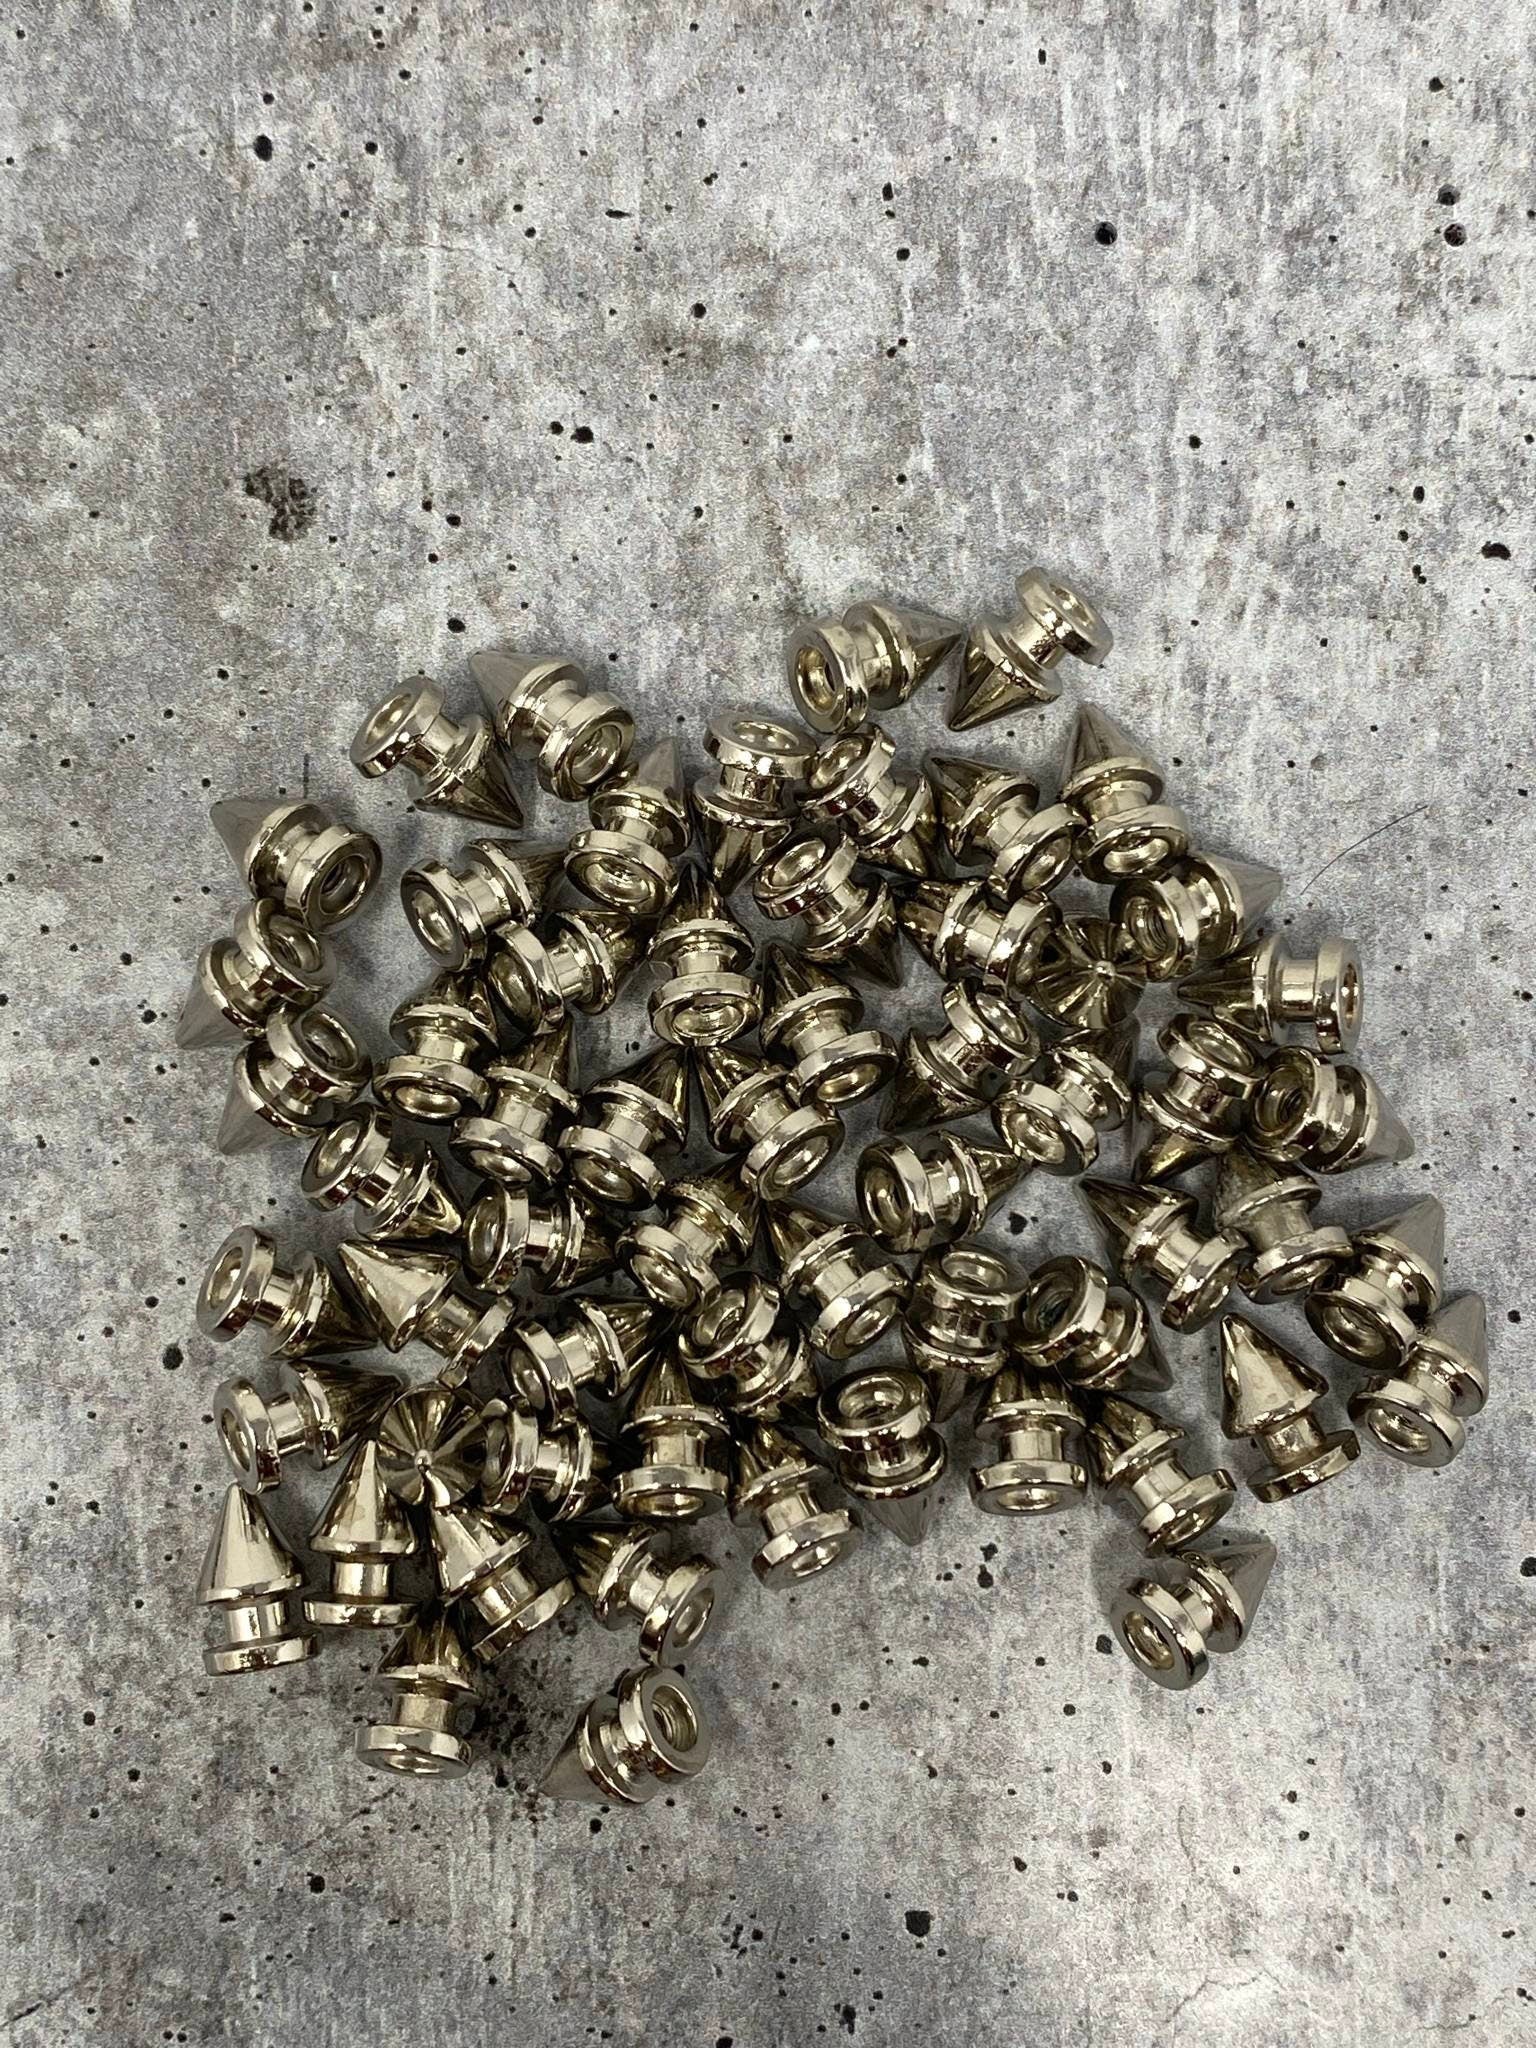 New,"Silver" Spikes, 12mm, 100-pcs, Spikes w/Screws, Small Cone Spikes & Studs, Metallic Screw-Back for DIY Punk, Leather, Bags, and Apparel